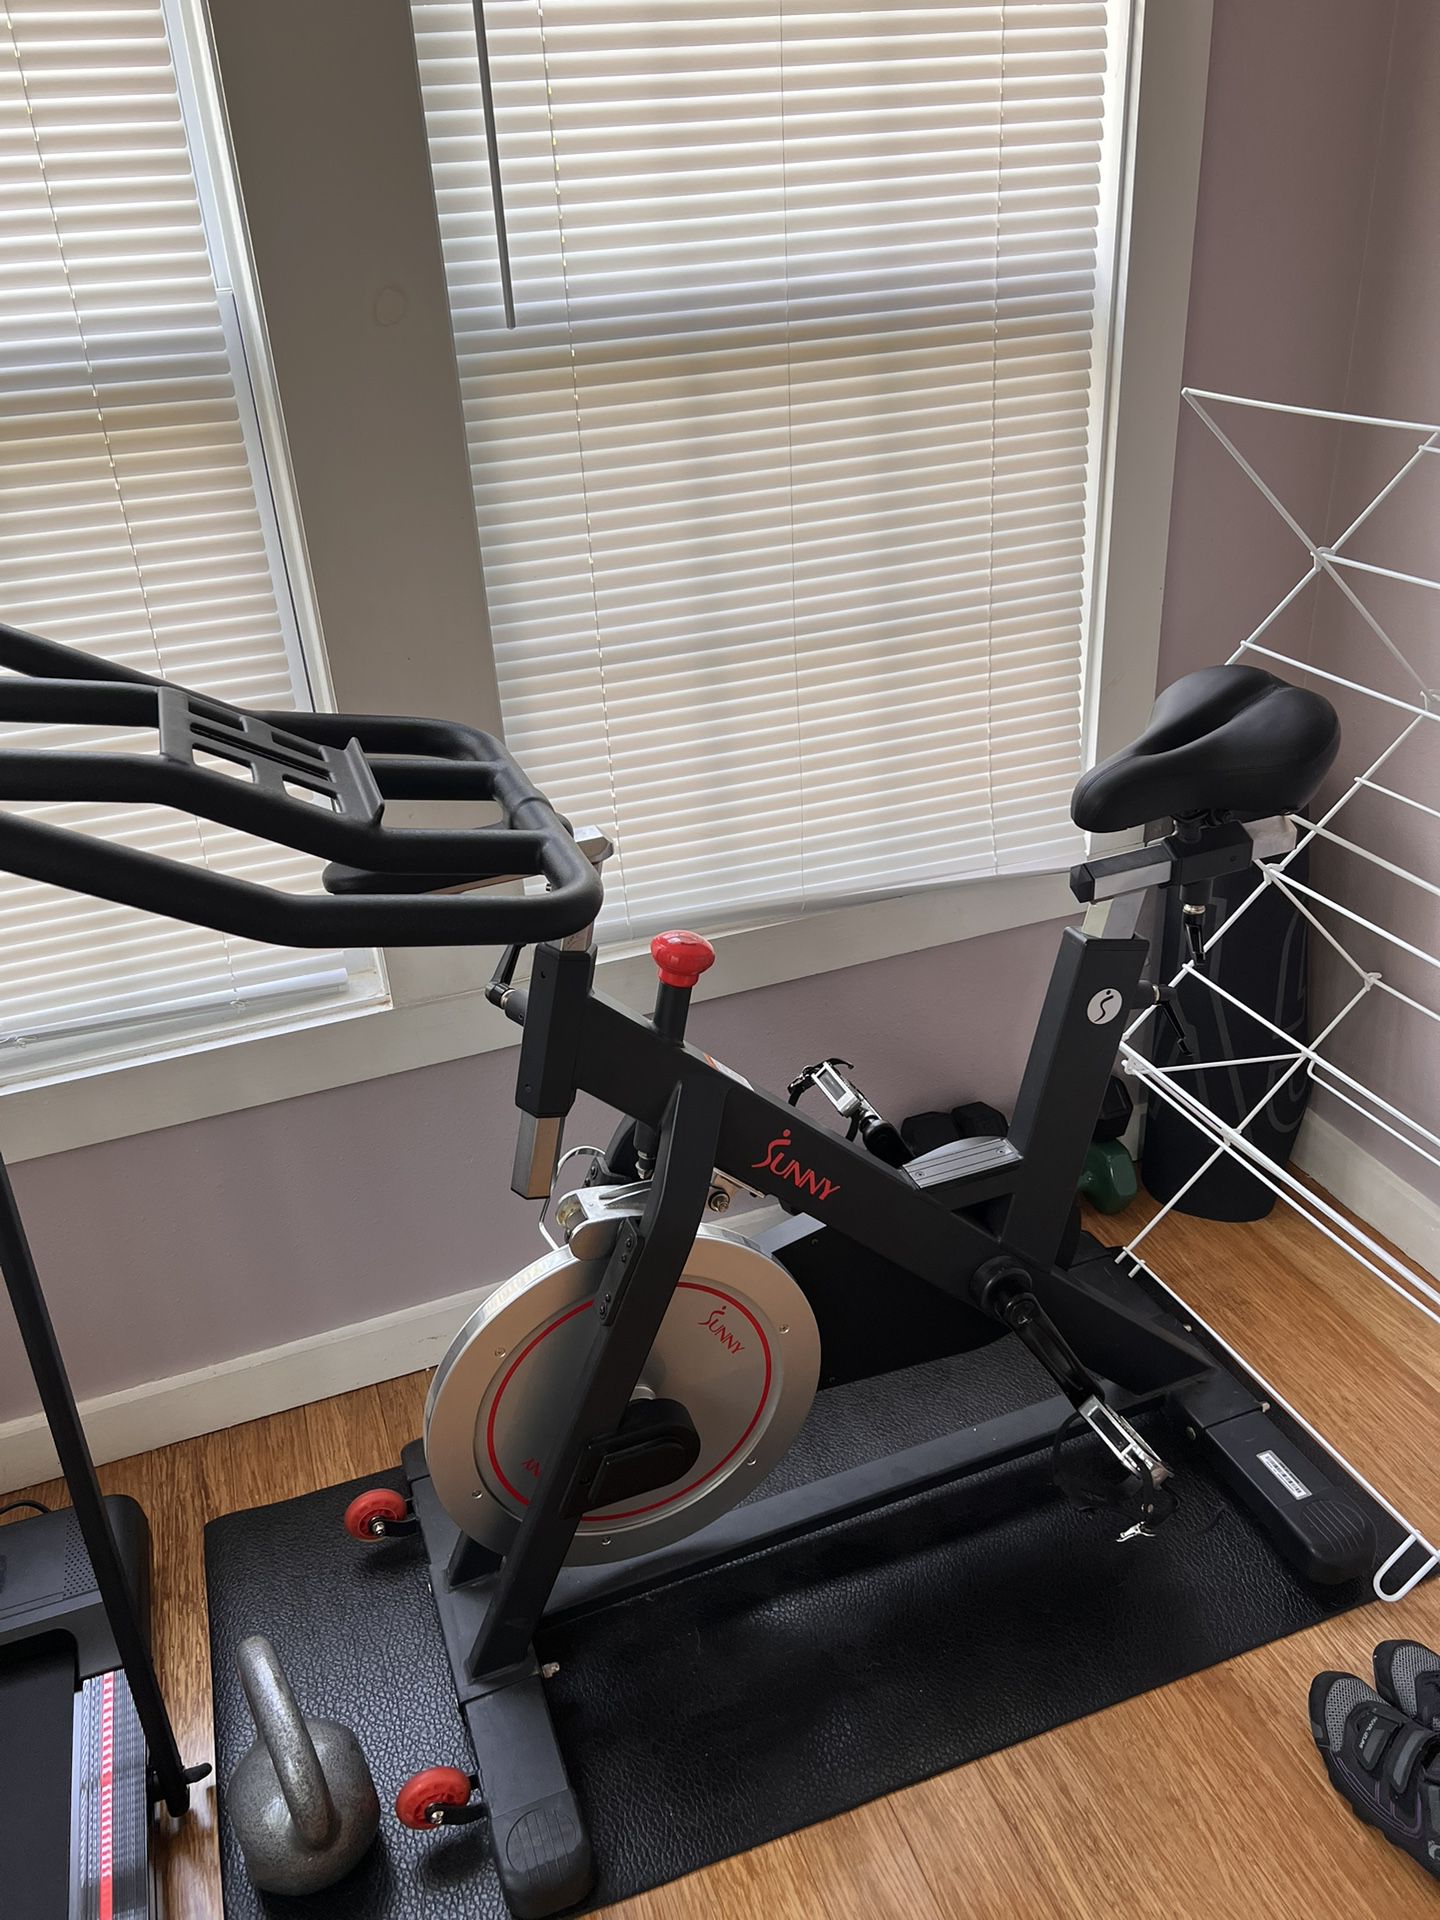 Sunny Health and Fitness Indoor Cycling Bike